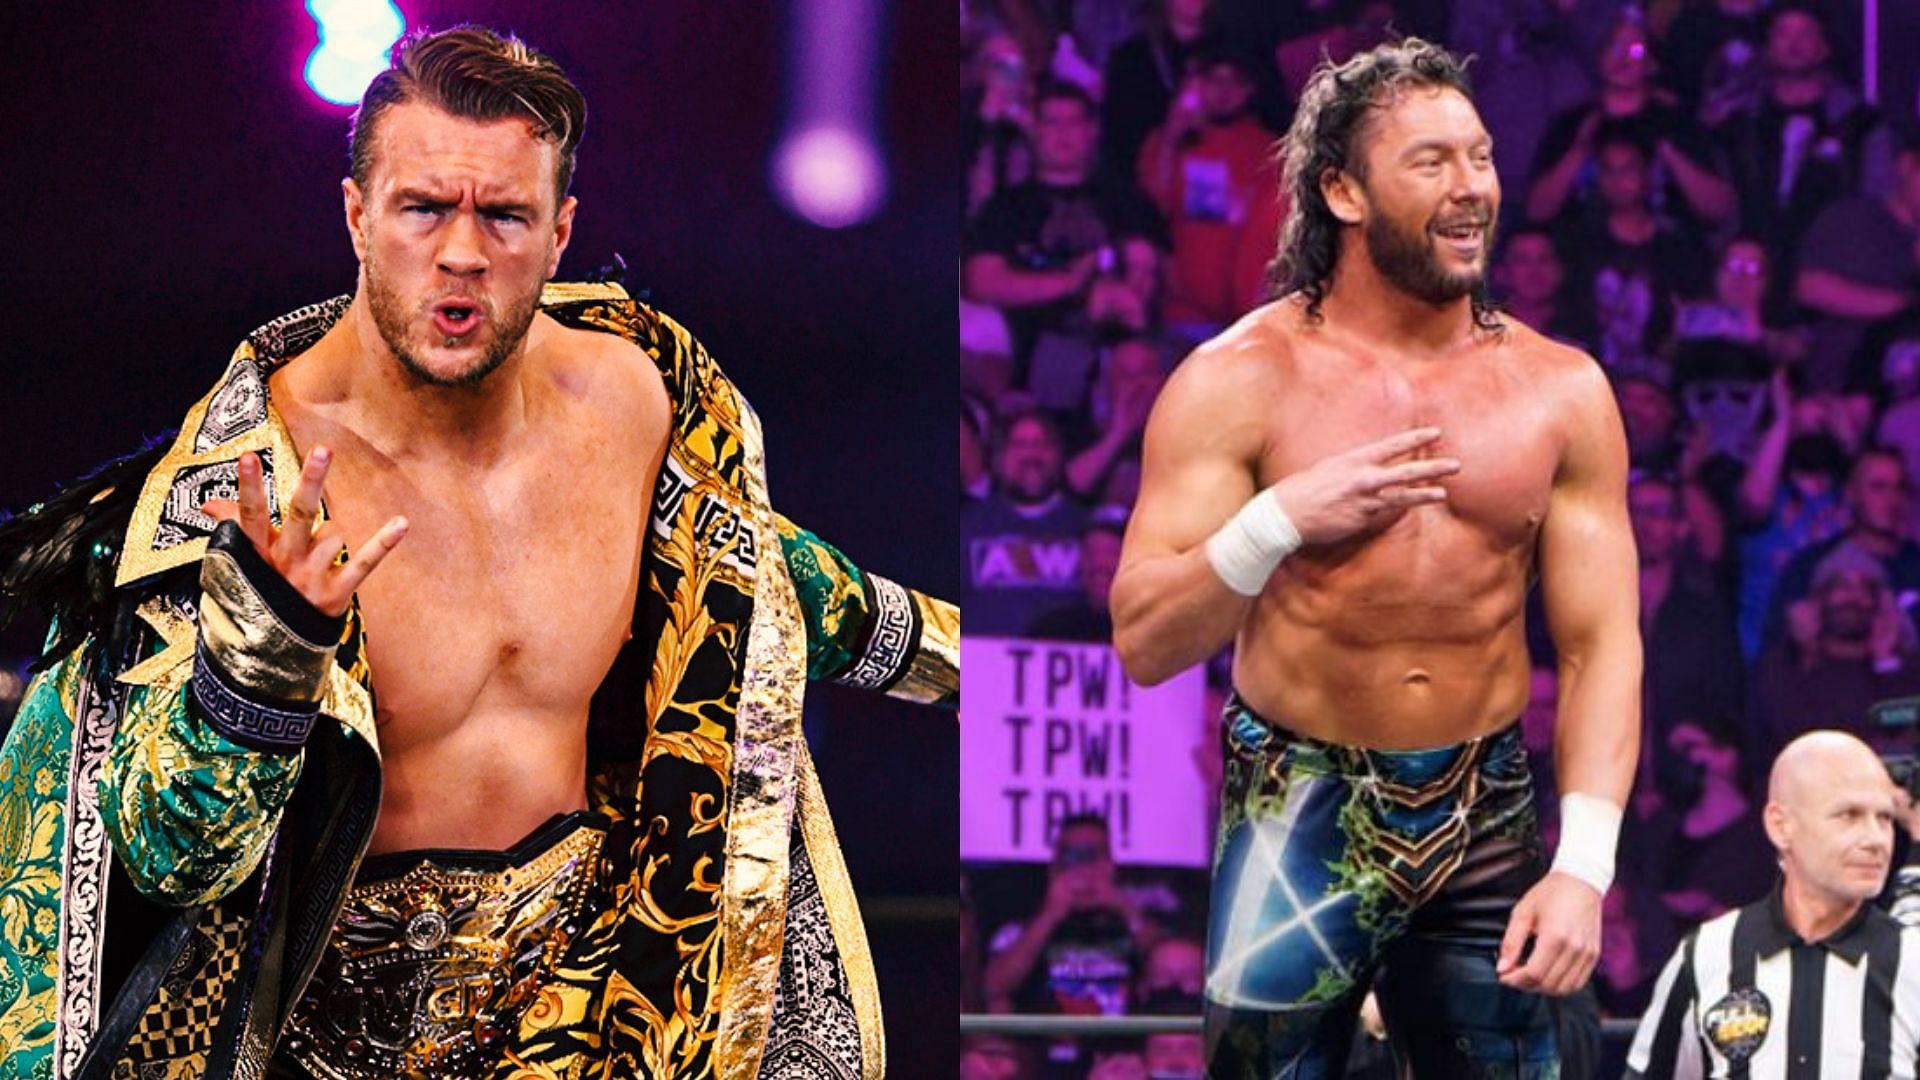 Will Ospreay(left); Kenny Omega(right)